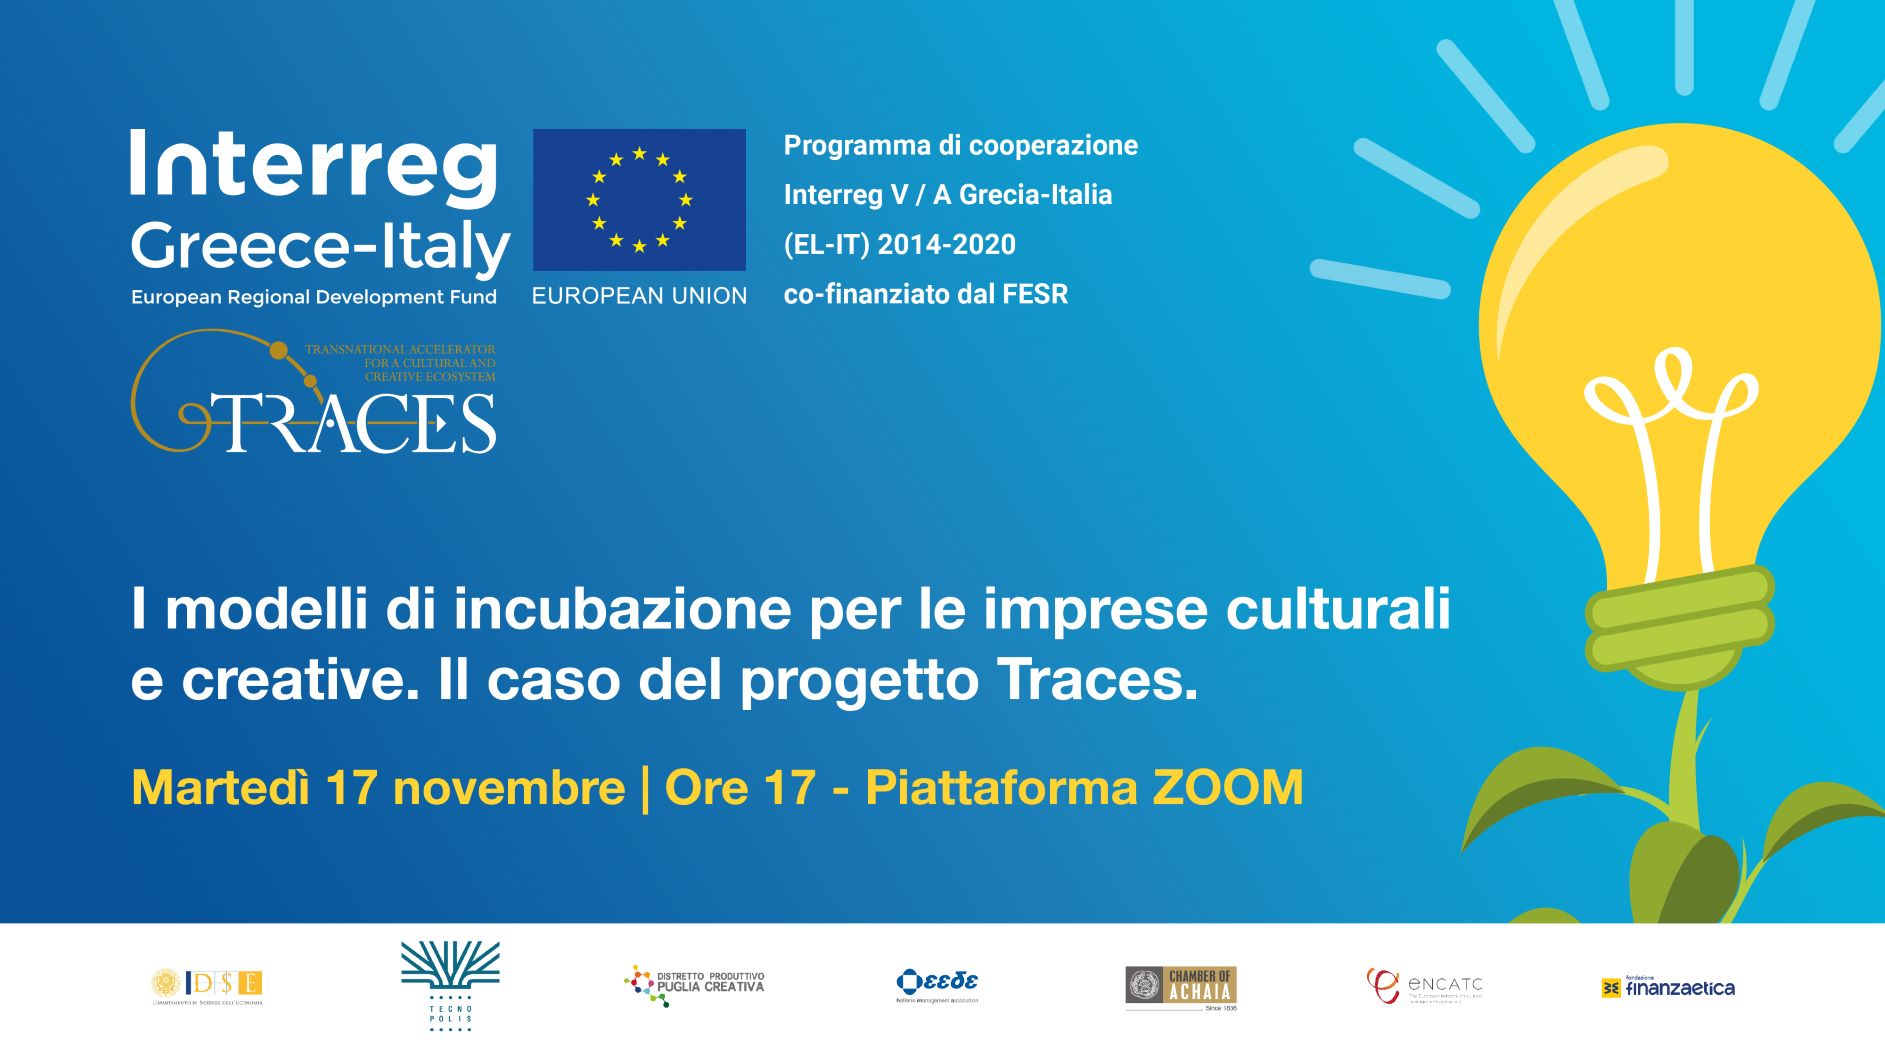 “INCUBATION MODELS FOR CULTURAL AND CREATIVE INDUSTRIES. THE CASE STUDY: THE TRACES PROJECT” – 17/11/2020 H. 17 ON ZOOM PLATFORM